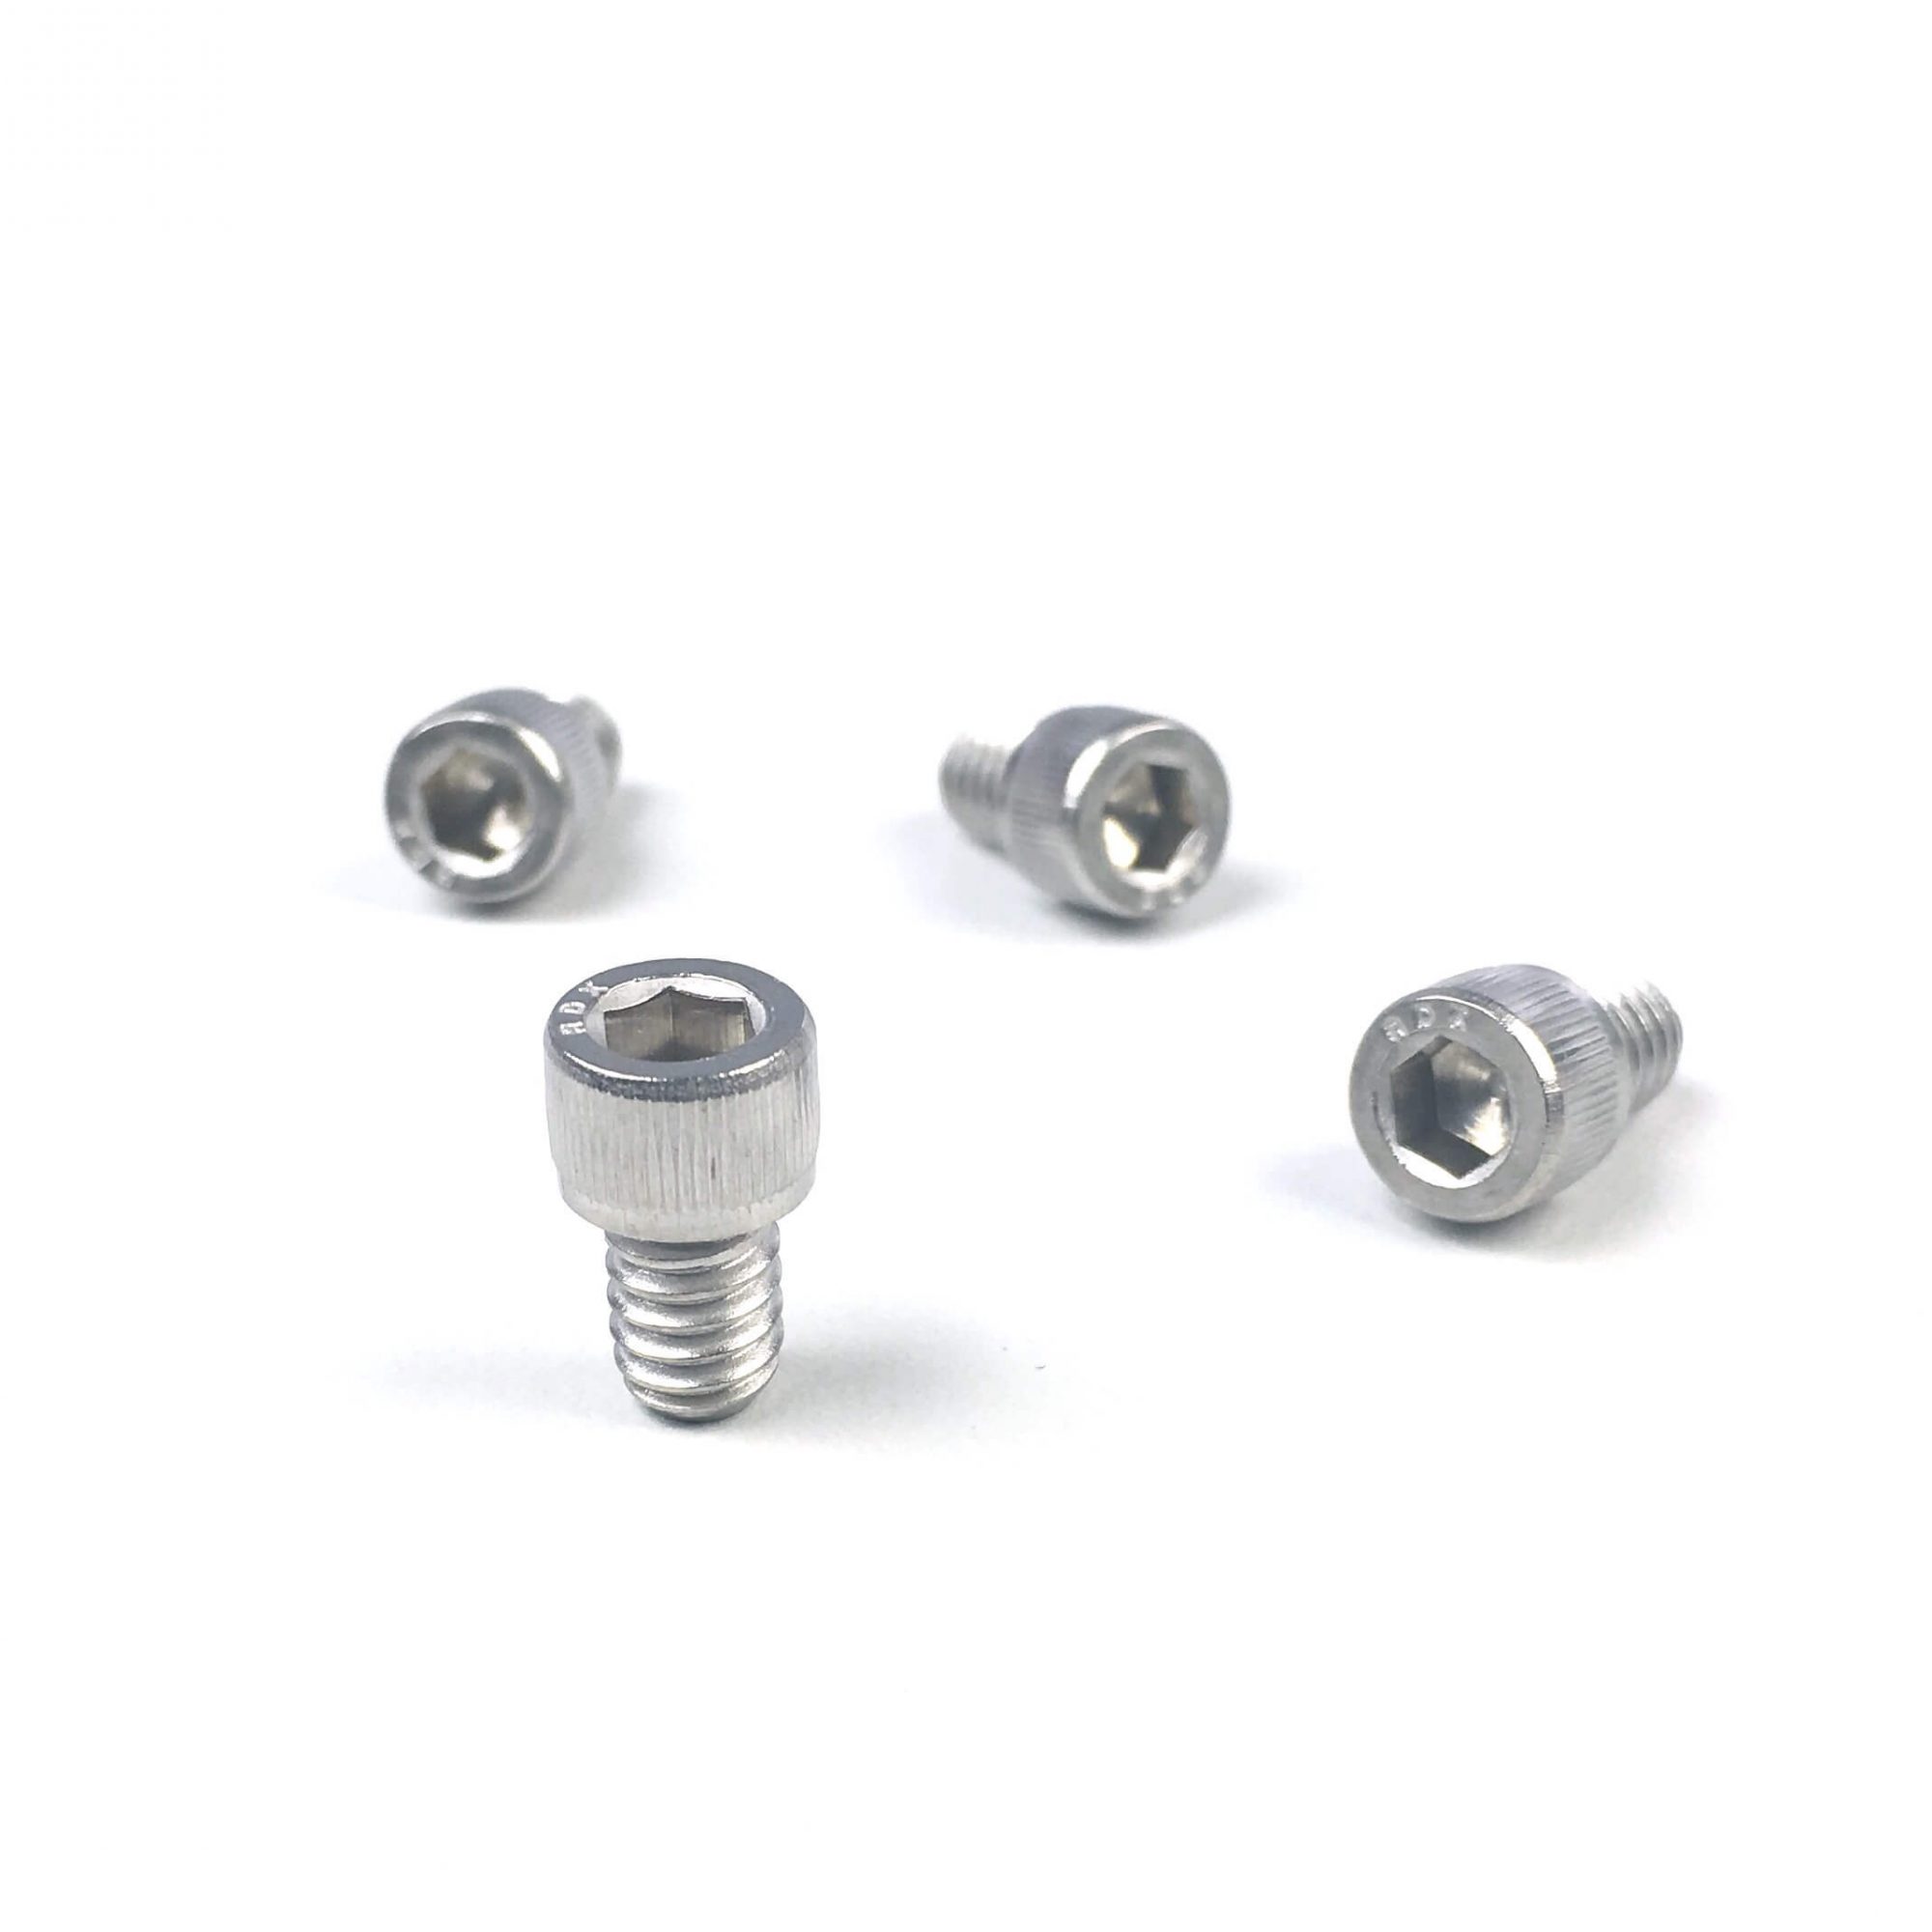 Set of 4 handle screws for the Sony PXW-FS7 camcorder. They are not  genuine Sony screws, however they are the exact size and fit, you will never see the difference except for the price :)